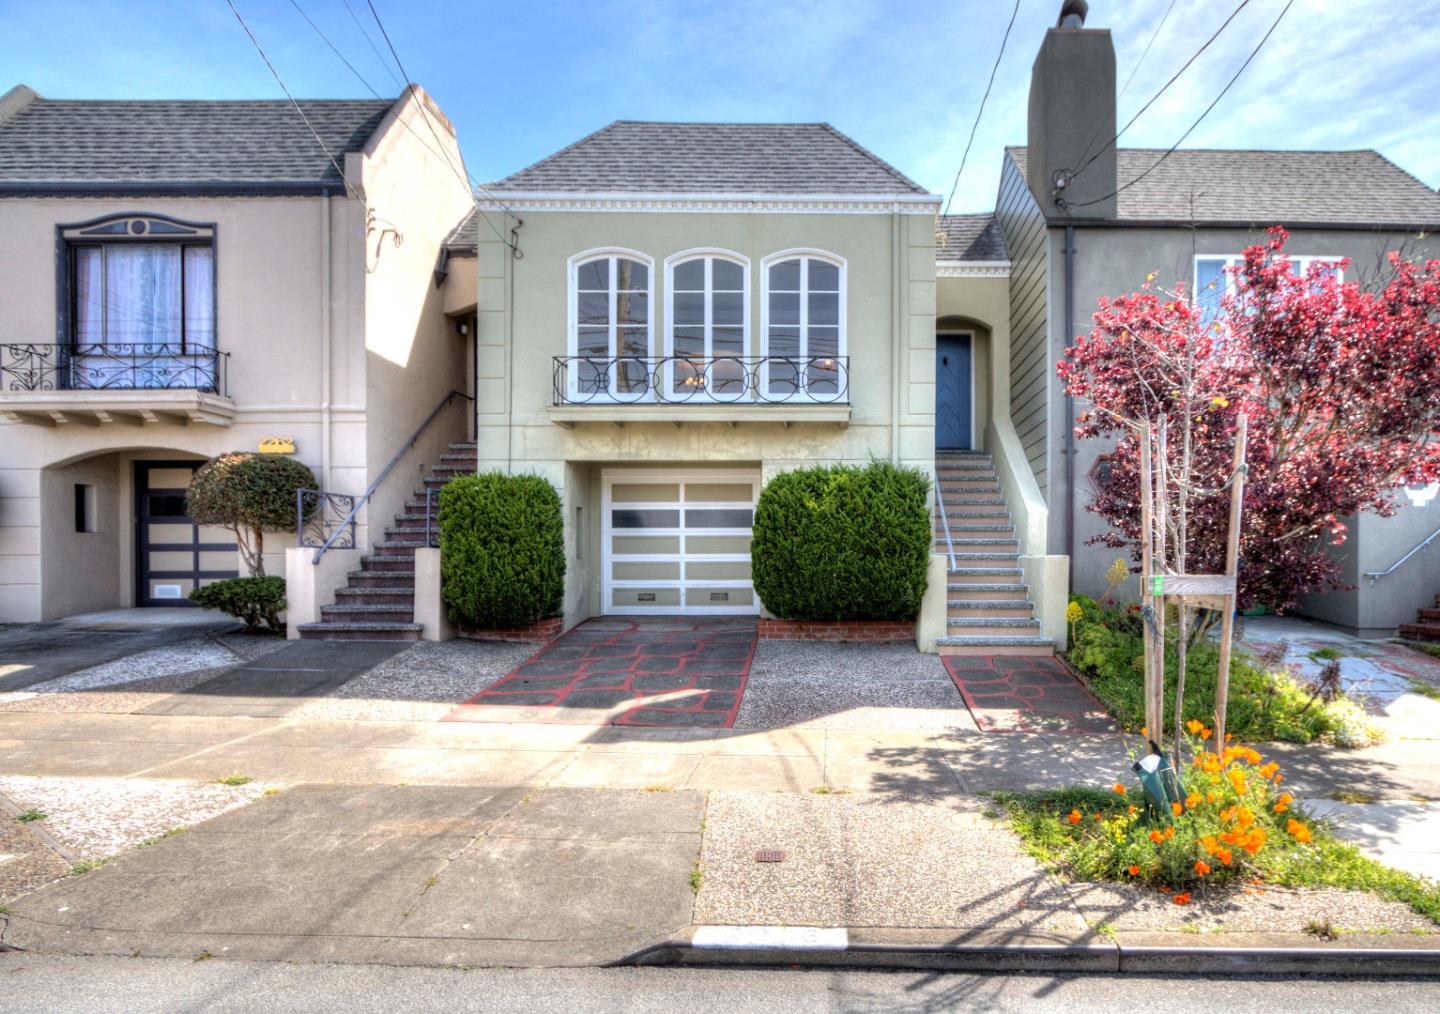 Photo of 2266 35th Ave in San Francisco, CA